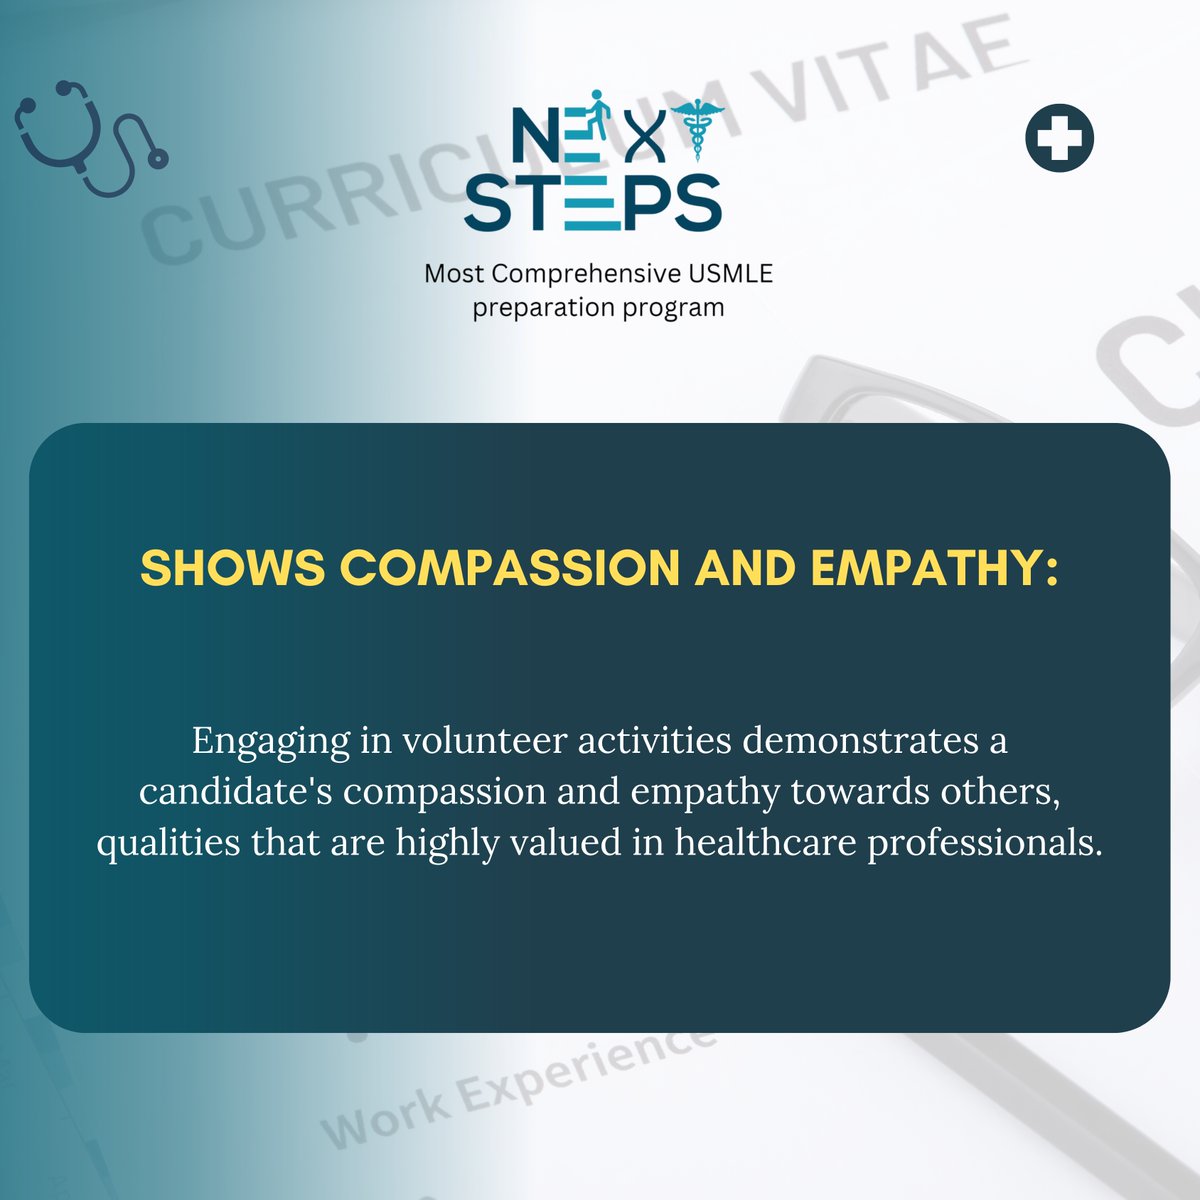 Boost your CV with volunteer experience! 🌟 Showcase dedication, skills, and compassion that set you apart. 
Register Here : nextstepscareer.com/international-…

#nextstepsusmle #usmlecv  #USMLE #usmlepreparation #usmlematch #USMLEPrep #nextsteps #nextstepsusmle #NextStepSuccess